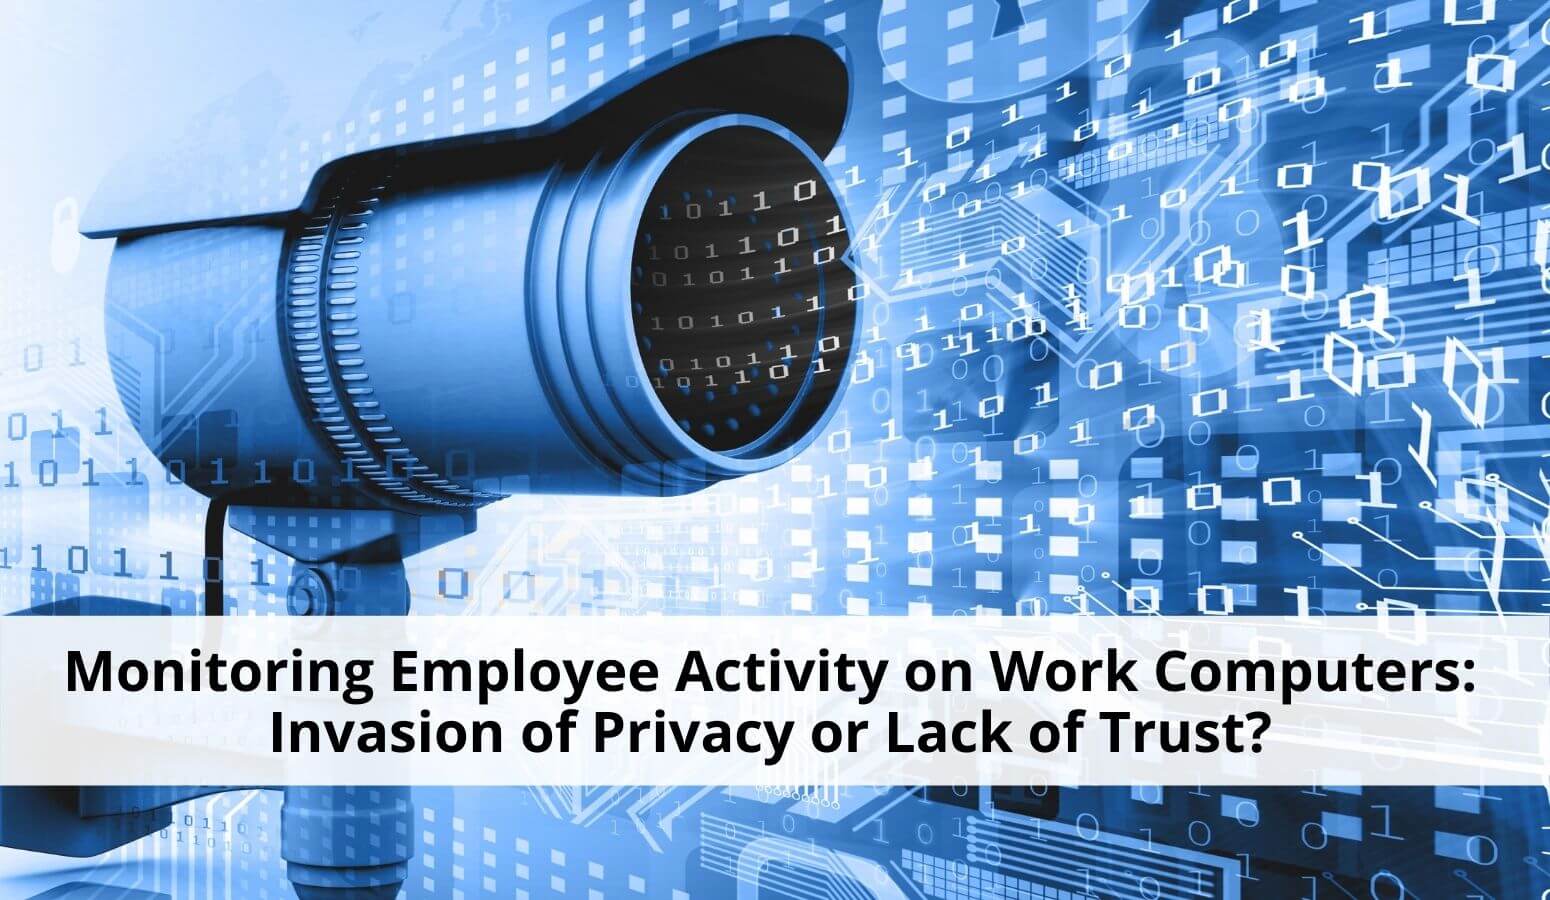 Monitoring employee activity on work computers